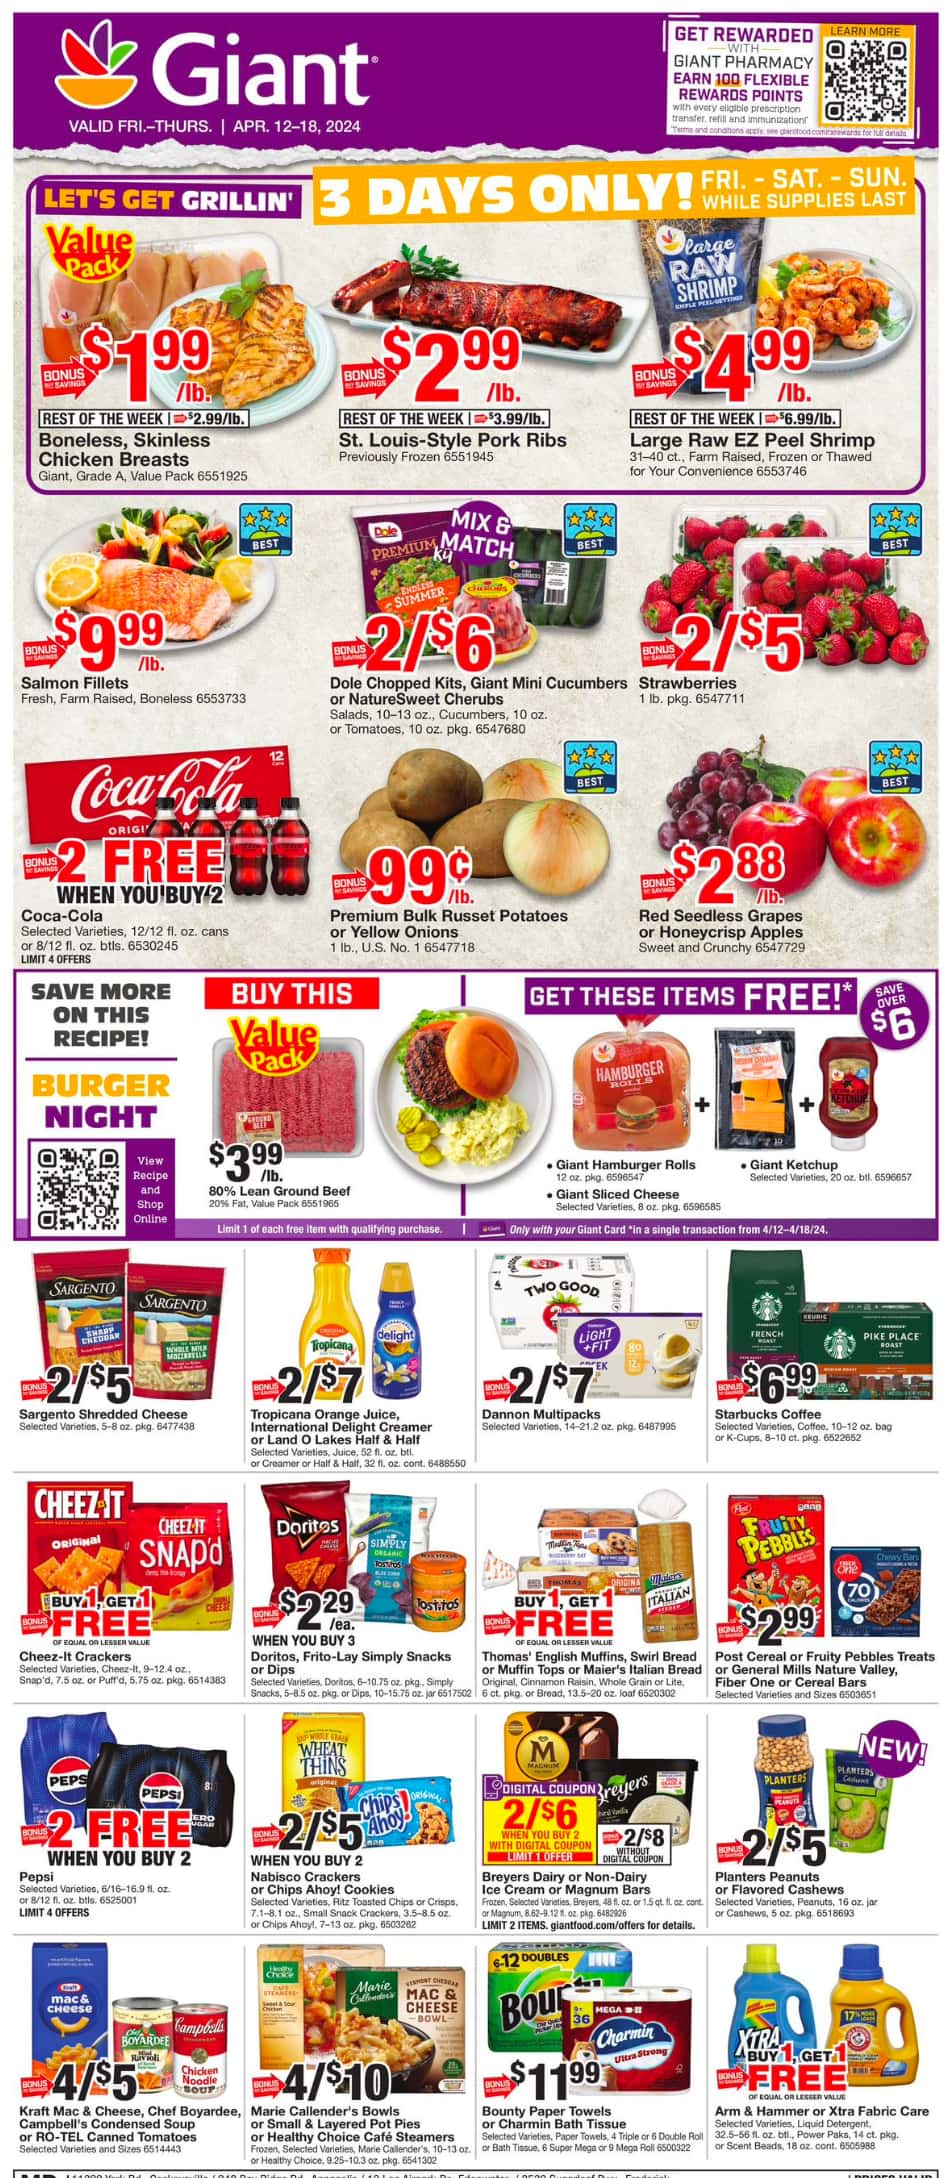 Giant_weekly_ad_041224_01